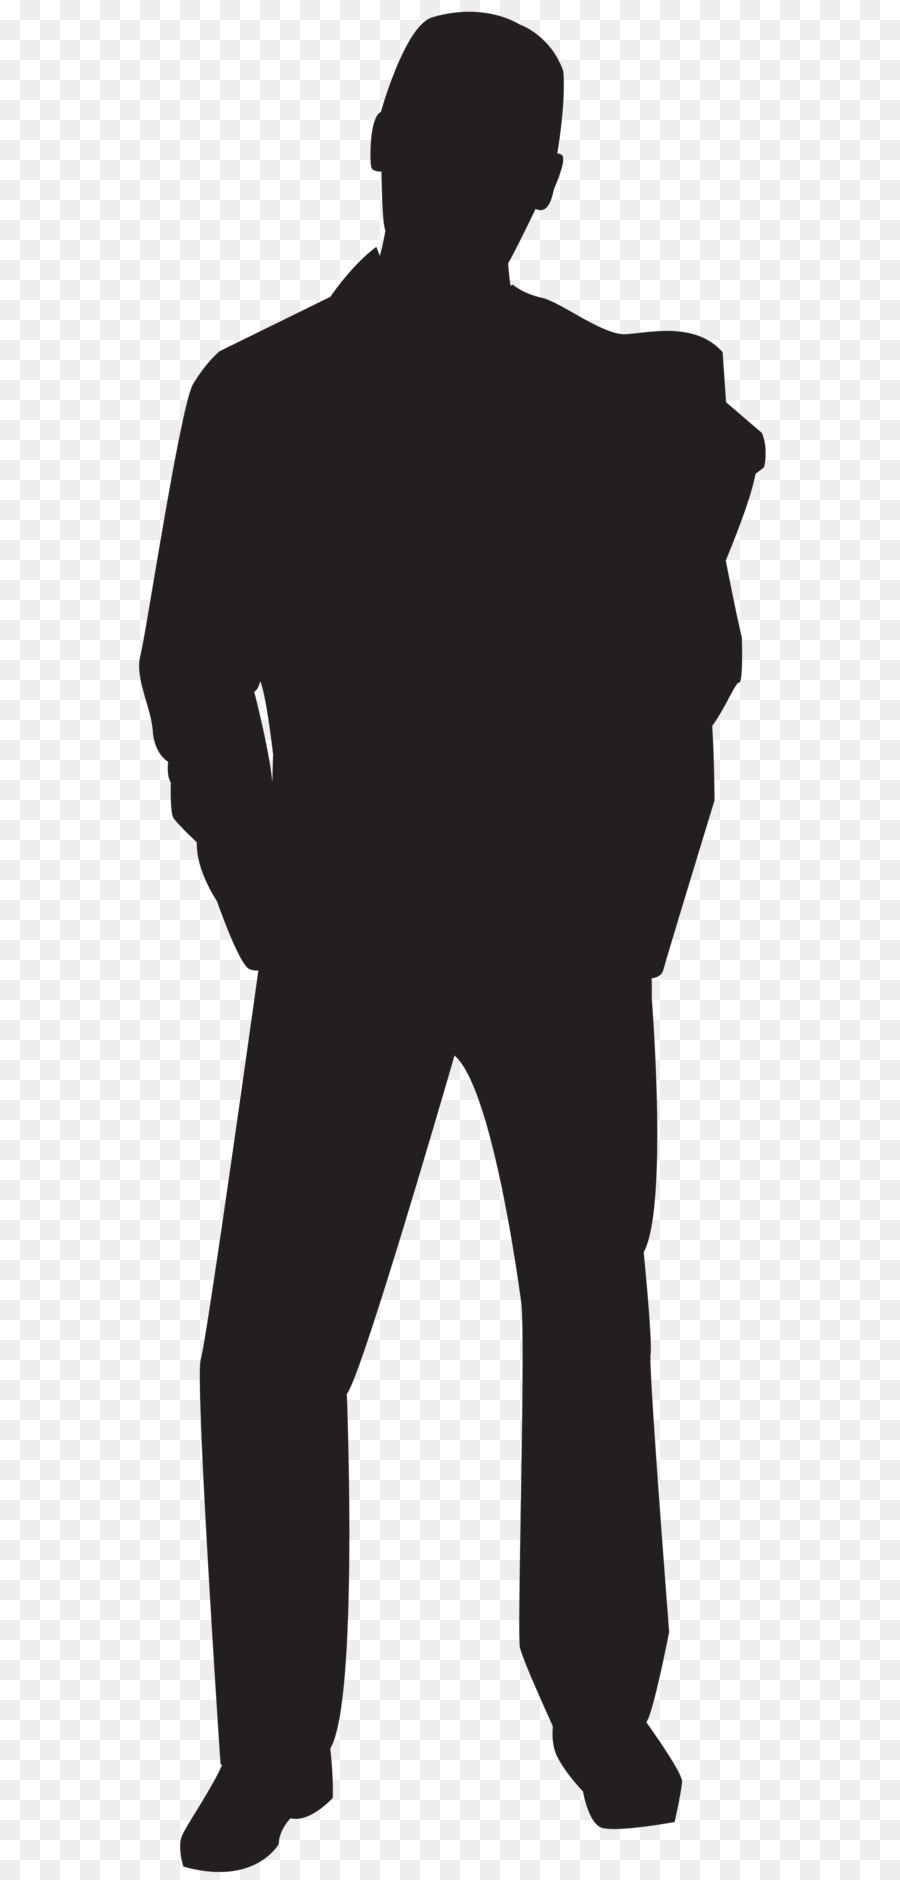 Silhouette Man Clip art - Man with Hands up Silhouette PNG Clip Art